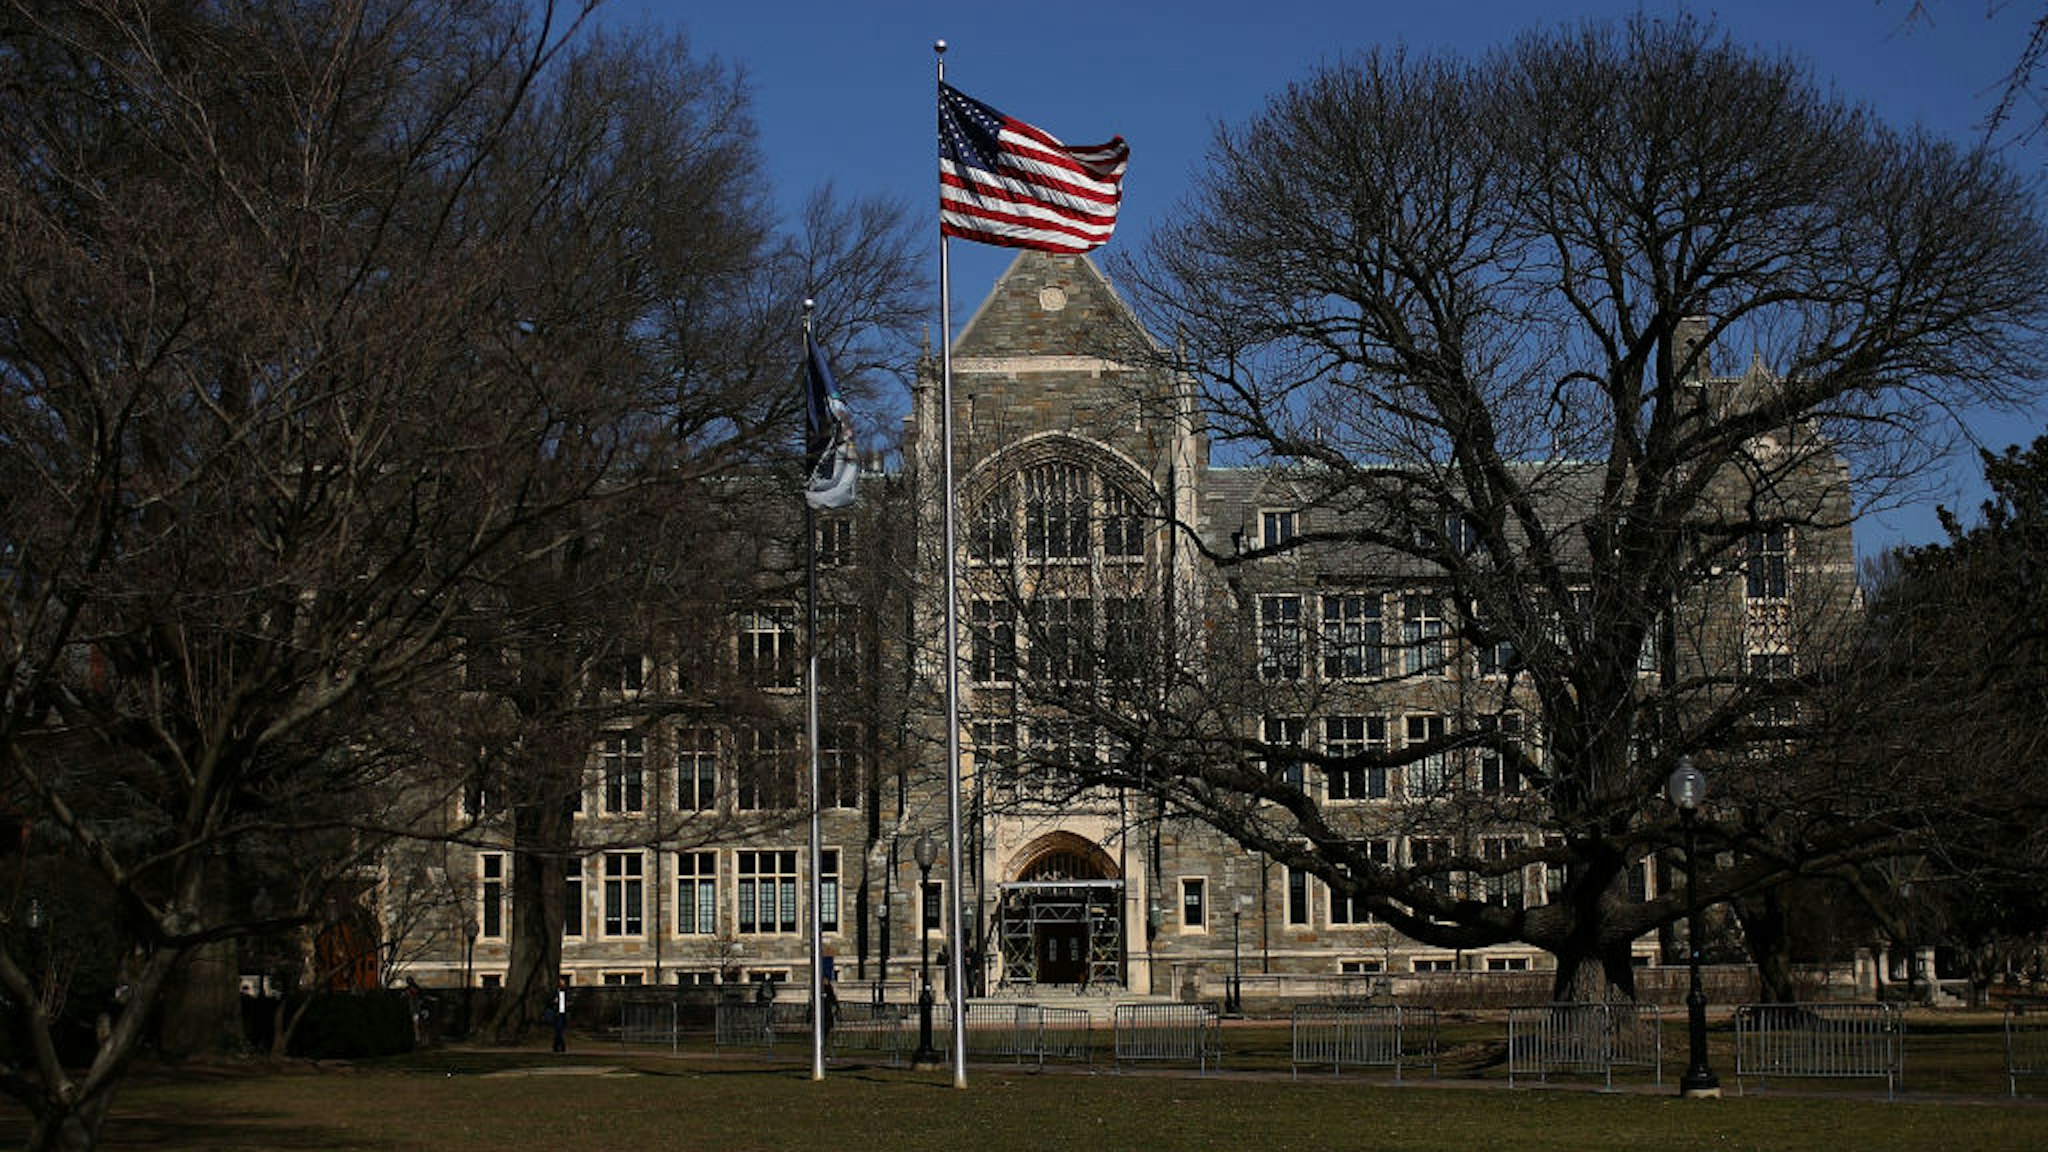 The campus of Georgetown University is shown March 12, 2019 in Washington, DC. Georgetown University and several other schools including Yale, Stanford, the University of Texas, University of Southern California and UCLA were named today in an FBI investigation targeting 50 people as part of a bribery scheme to accept students with lower test scores into some of the leading universities across the United States.